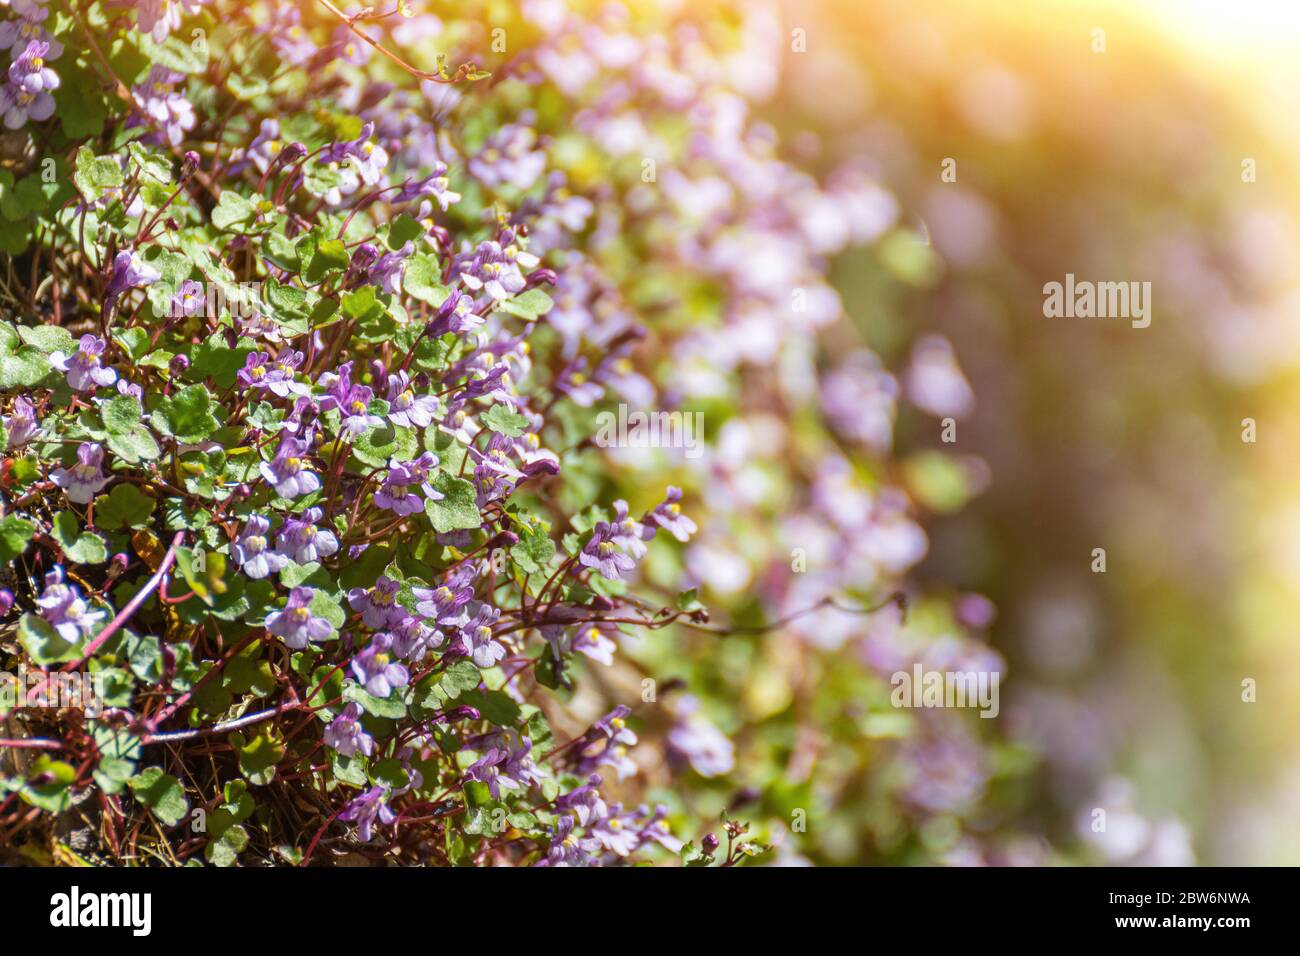 close-up of small purple flowers in sunbeams. gypsophila muralis with the tiny flowers. Stock Photo